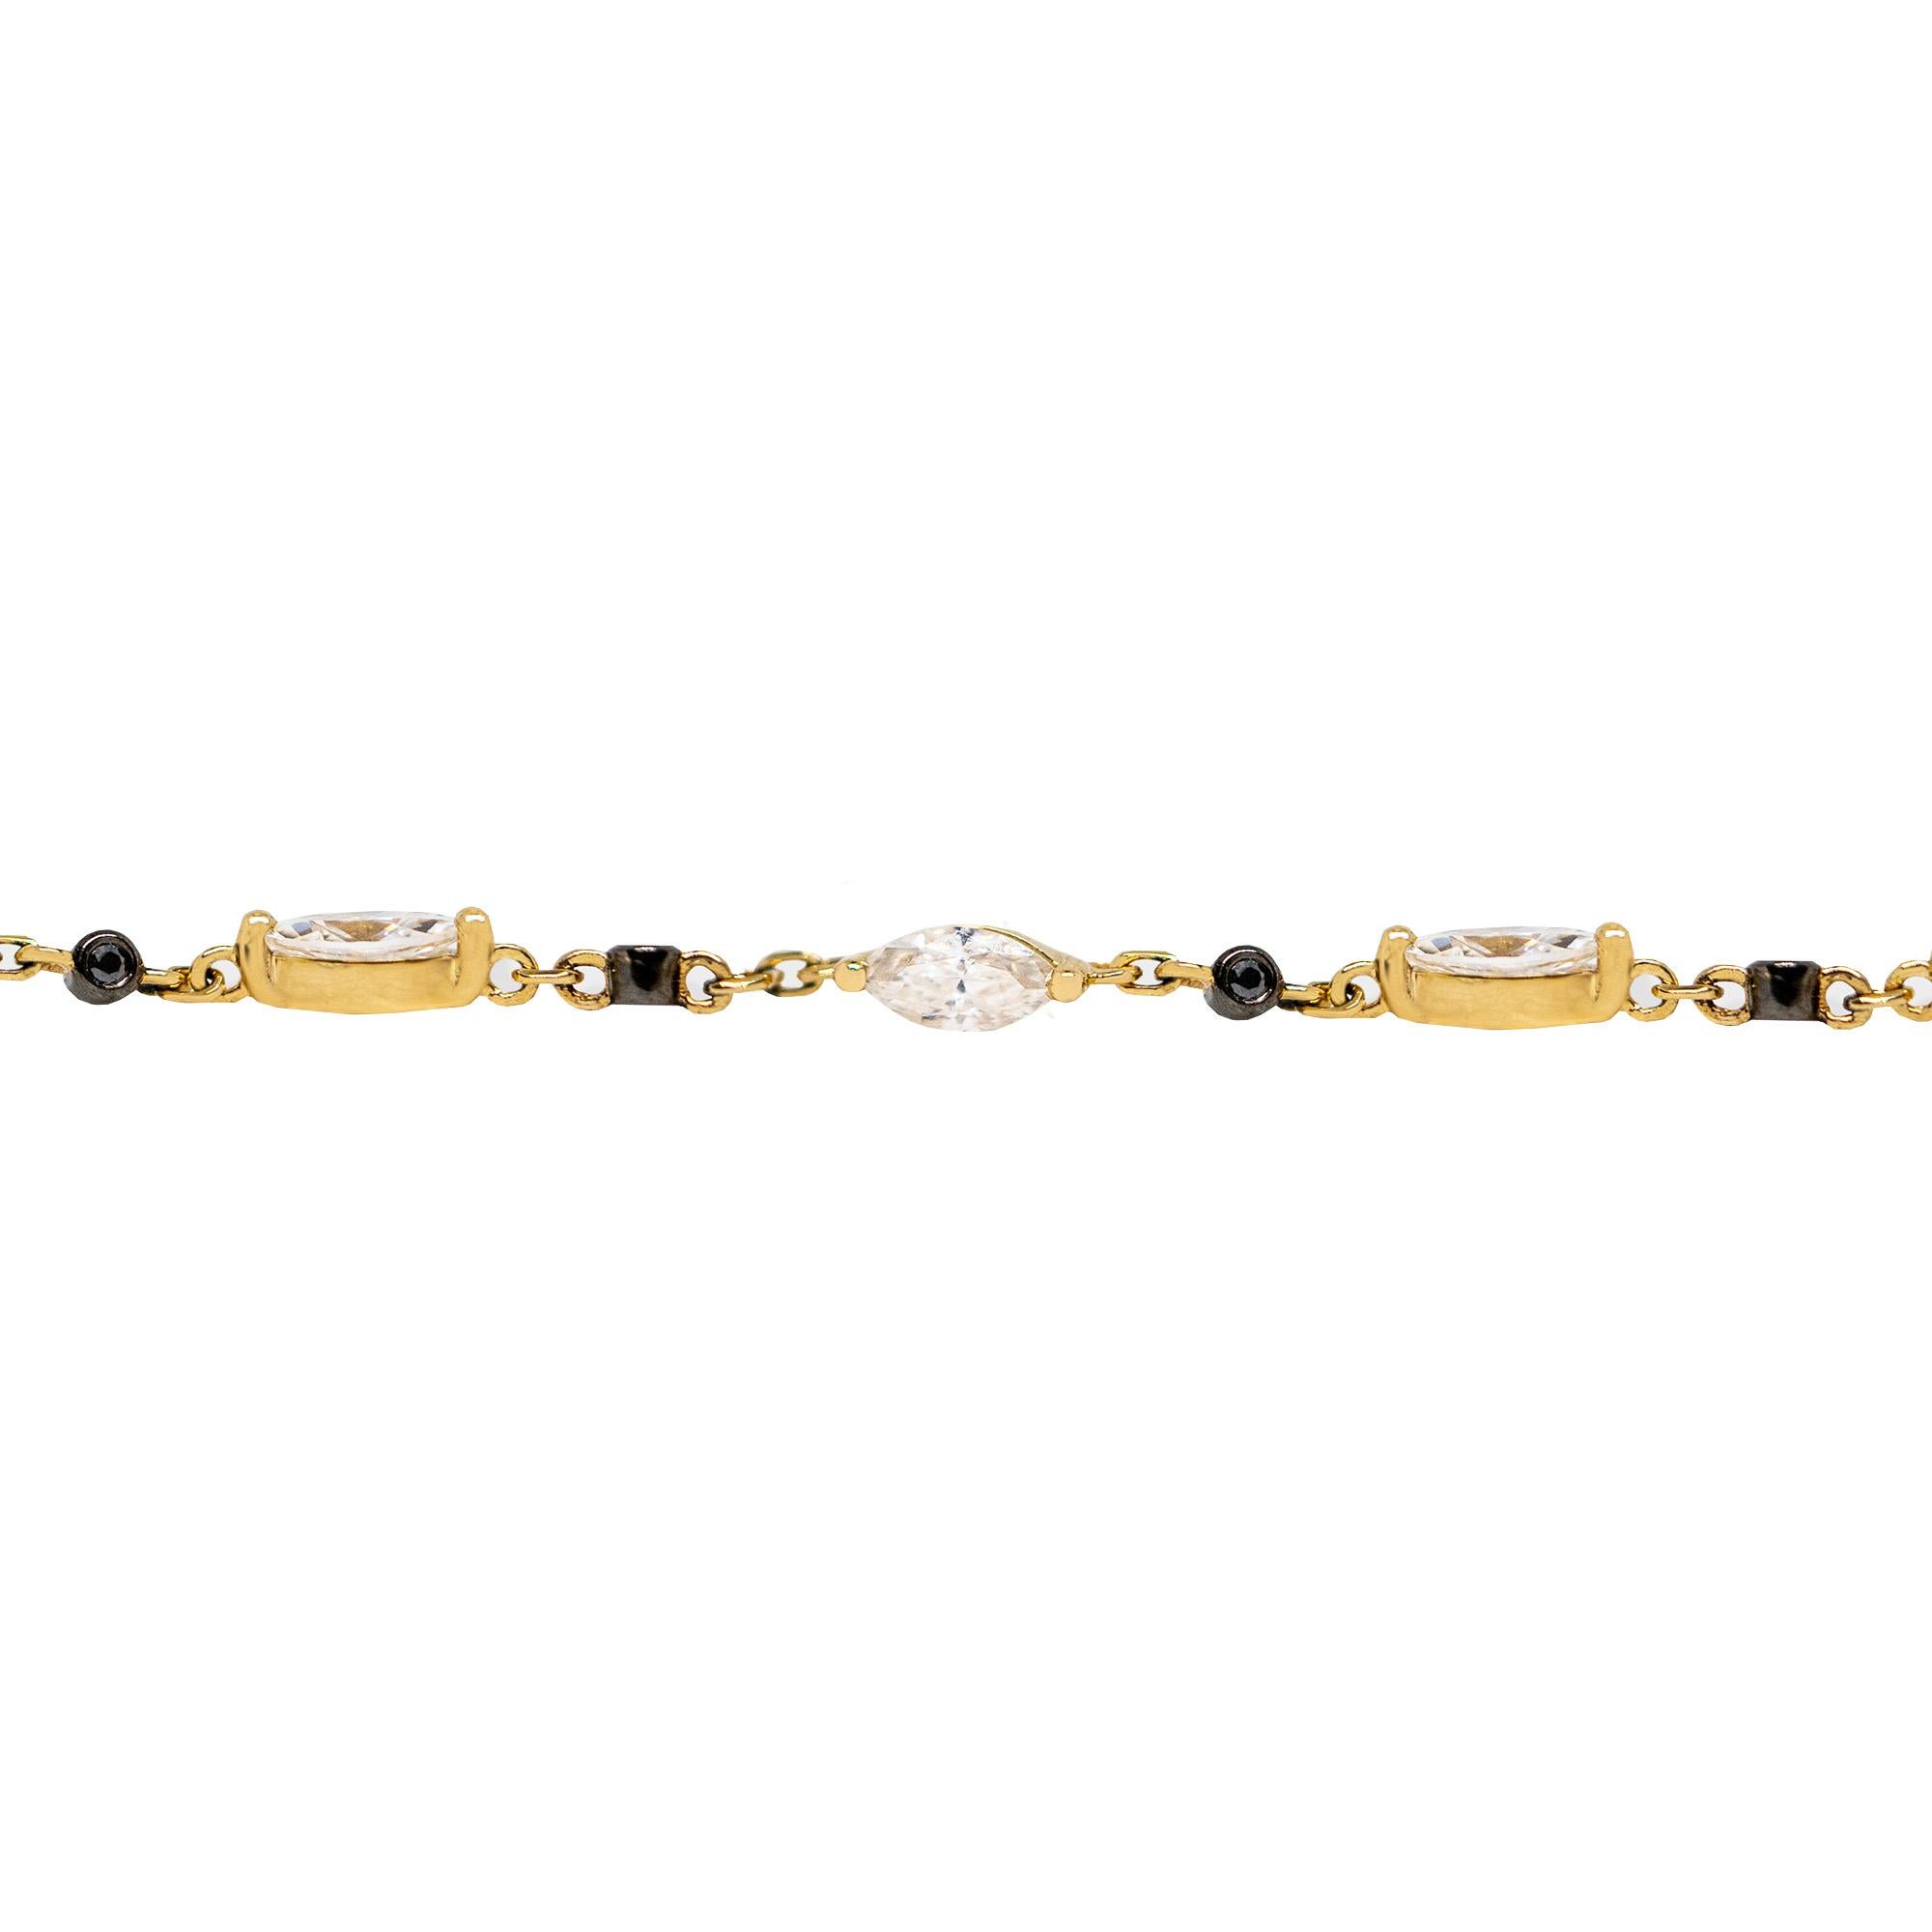 This Choker is made with twinkling white marquise moissanites and black round sapphires, set in black enamel. Like a constellation in the night sky, the marquise stones are shooting comets amongst the black sapphire night.

“She was his comet, his